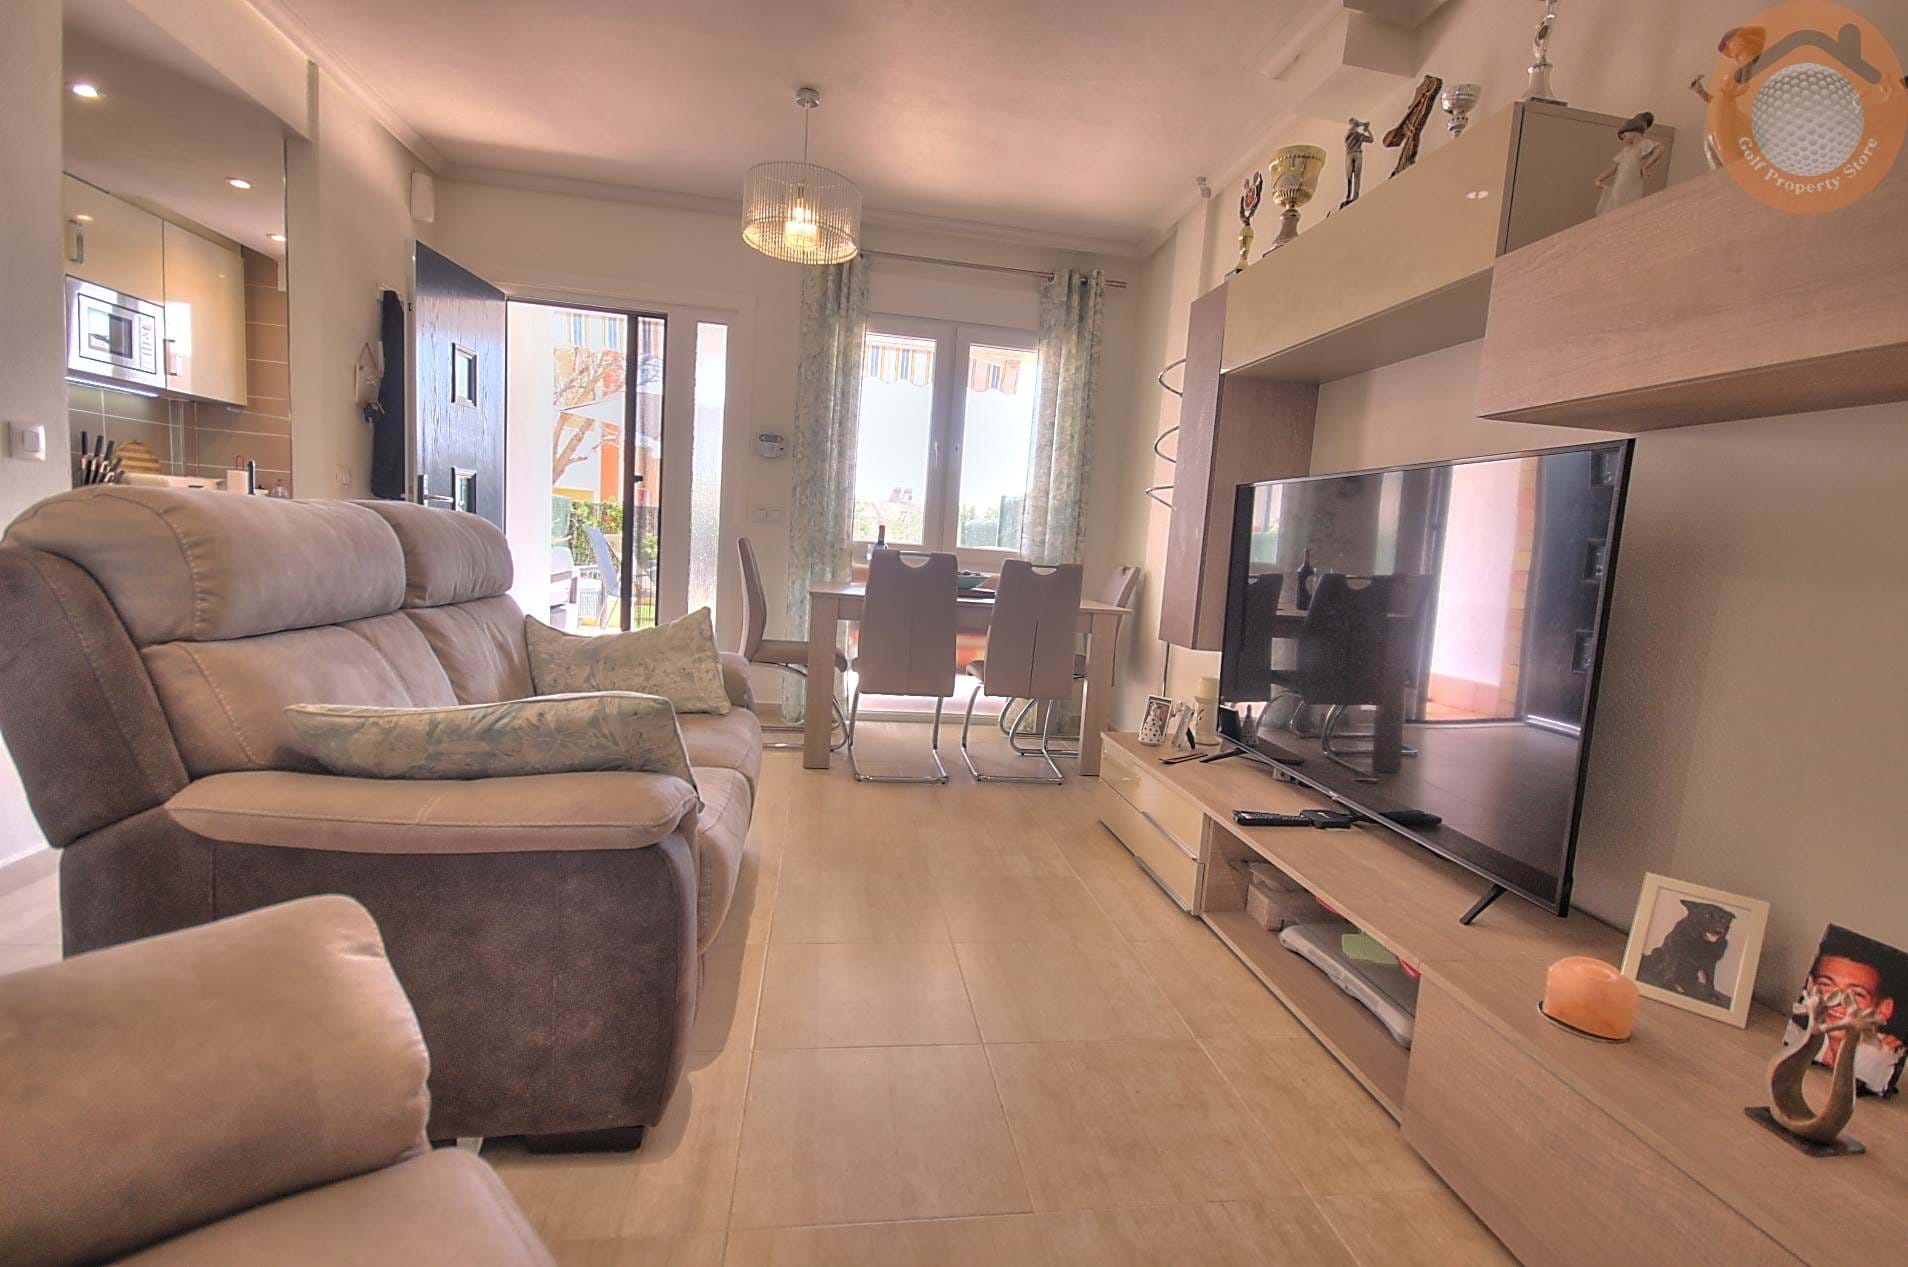 LA TERCIA TWO BED APARTMENT WITH LARGE DUAL GARDENS AND PRIVATE PARKING